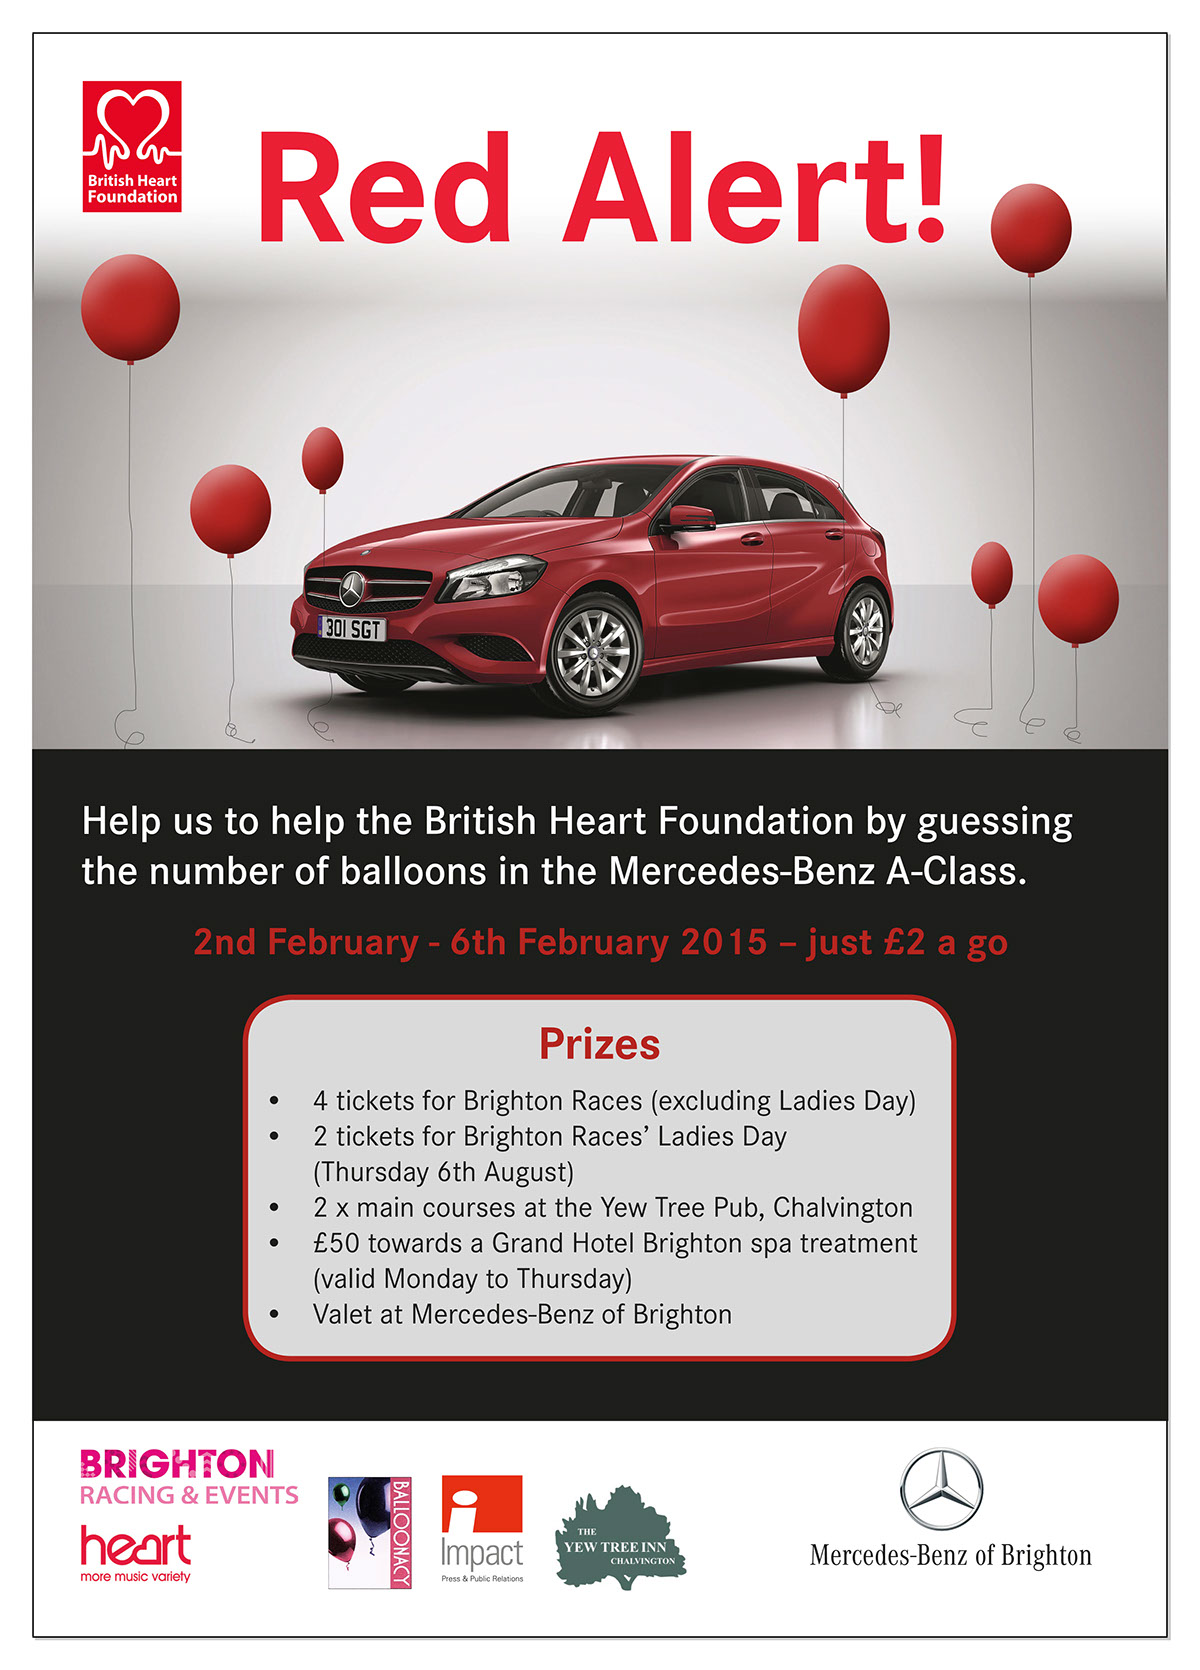 poster Emailer Web Banners British Heart Foundation charity Corporate Identity CI brand guidelines